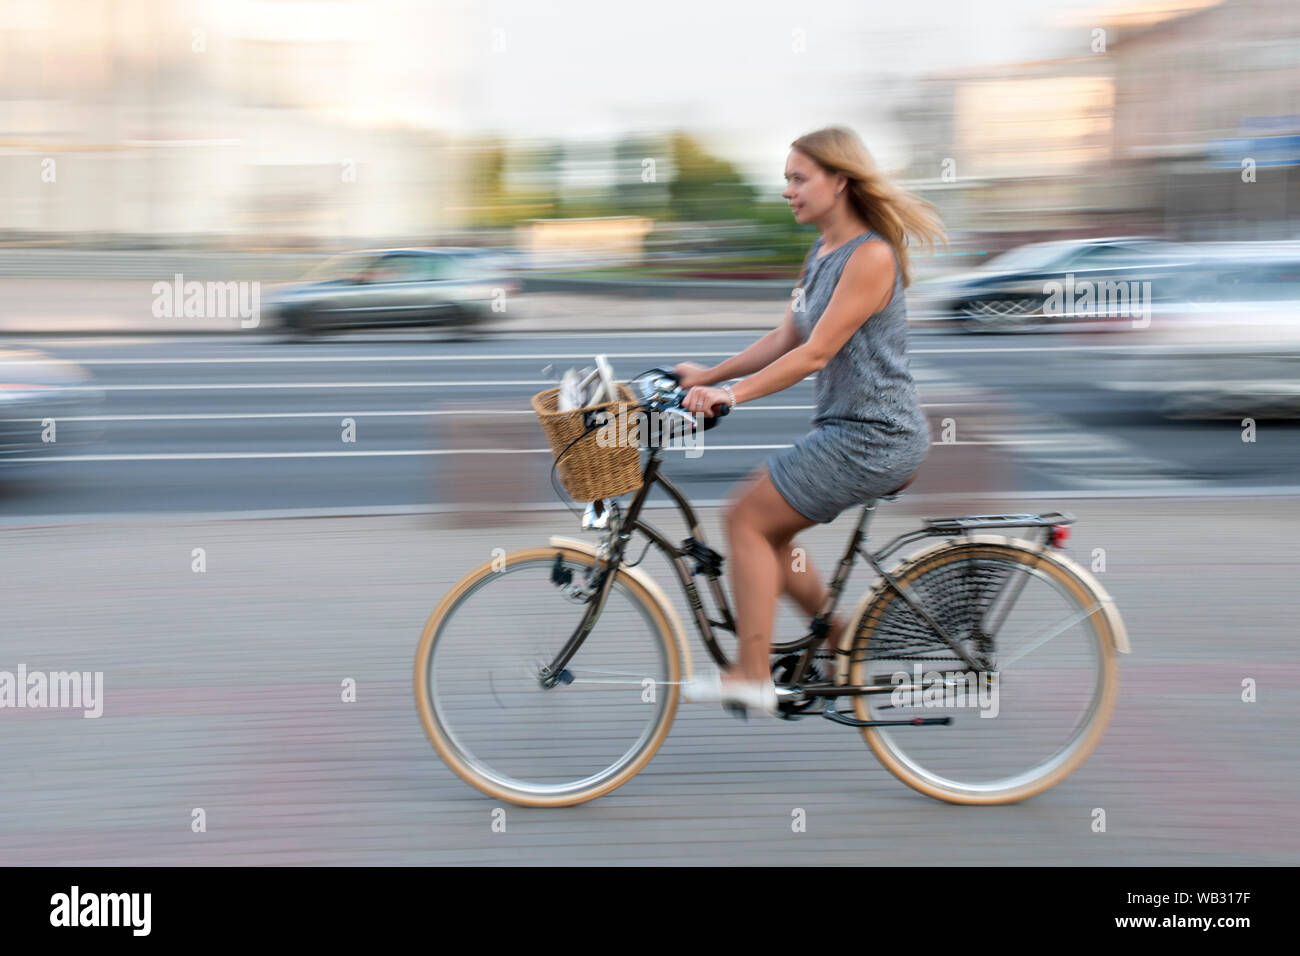 Woman on a bicycle in Minsk, Belarus. Stock Photo